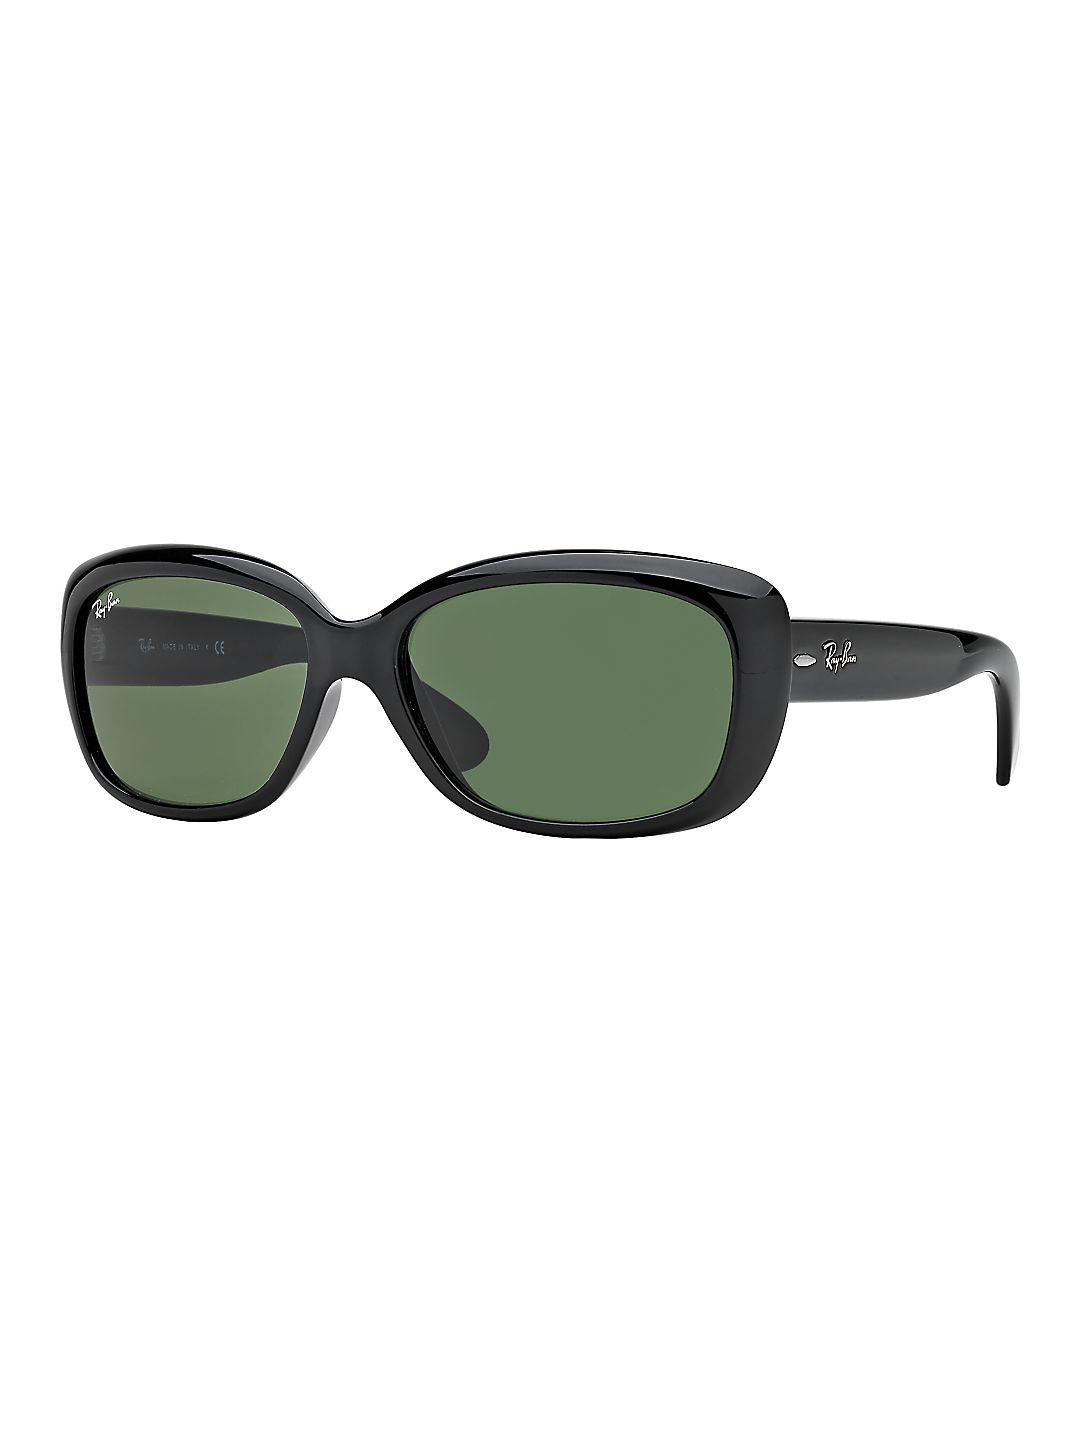 Ray-Ban Women's RB4101 Jackie Ohh Sunglasses, 58mm - image 1 of 2